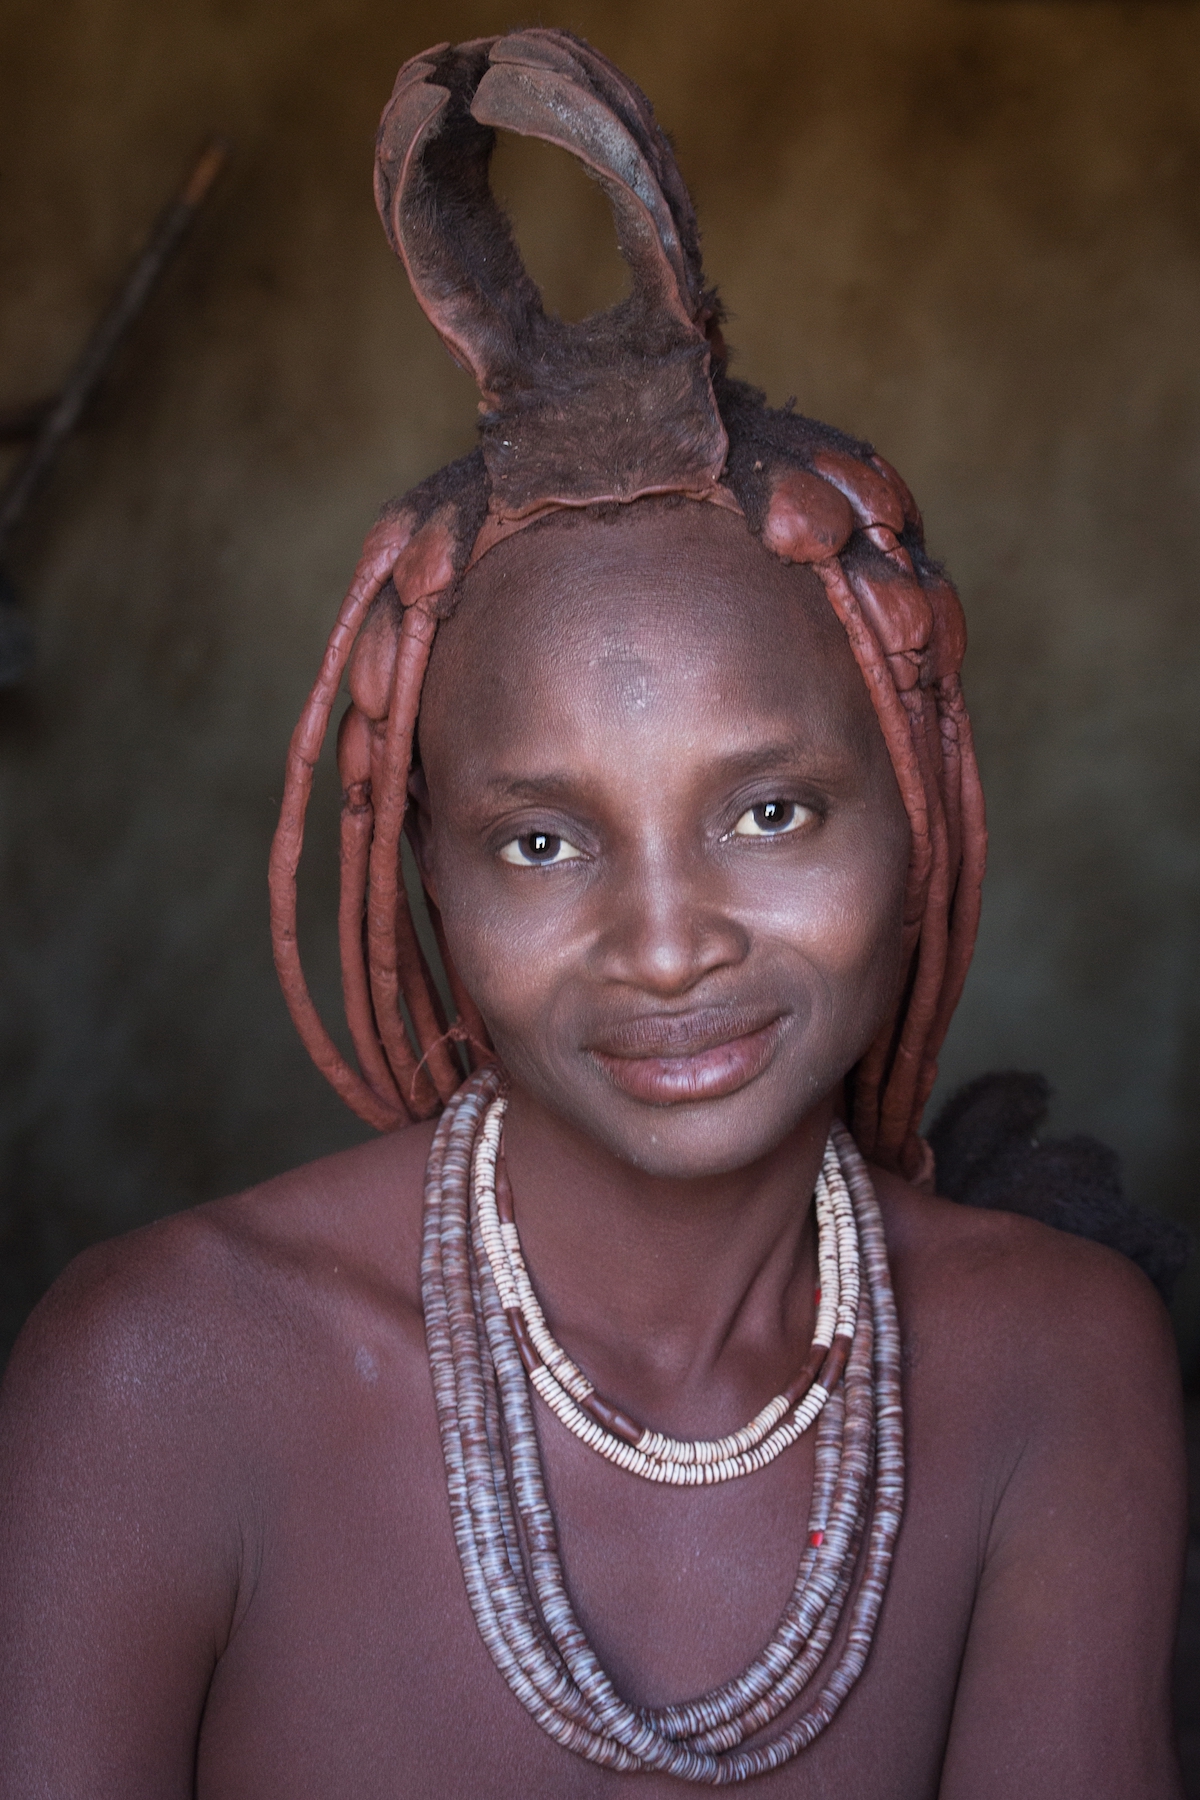 Photography of the Himba people in Namibia is a truly wonderful part of the Wild Images Photo Tour